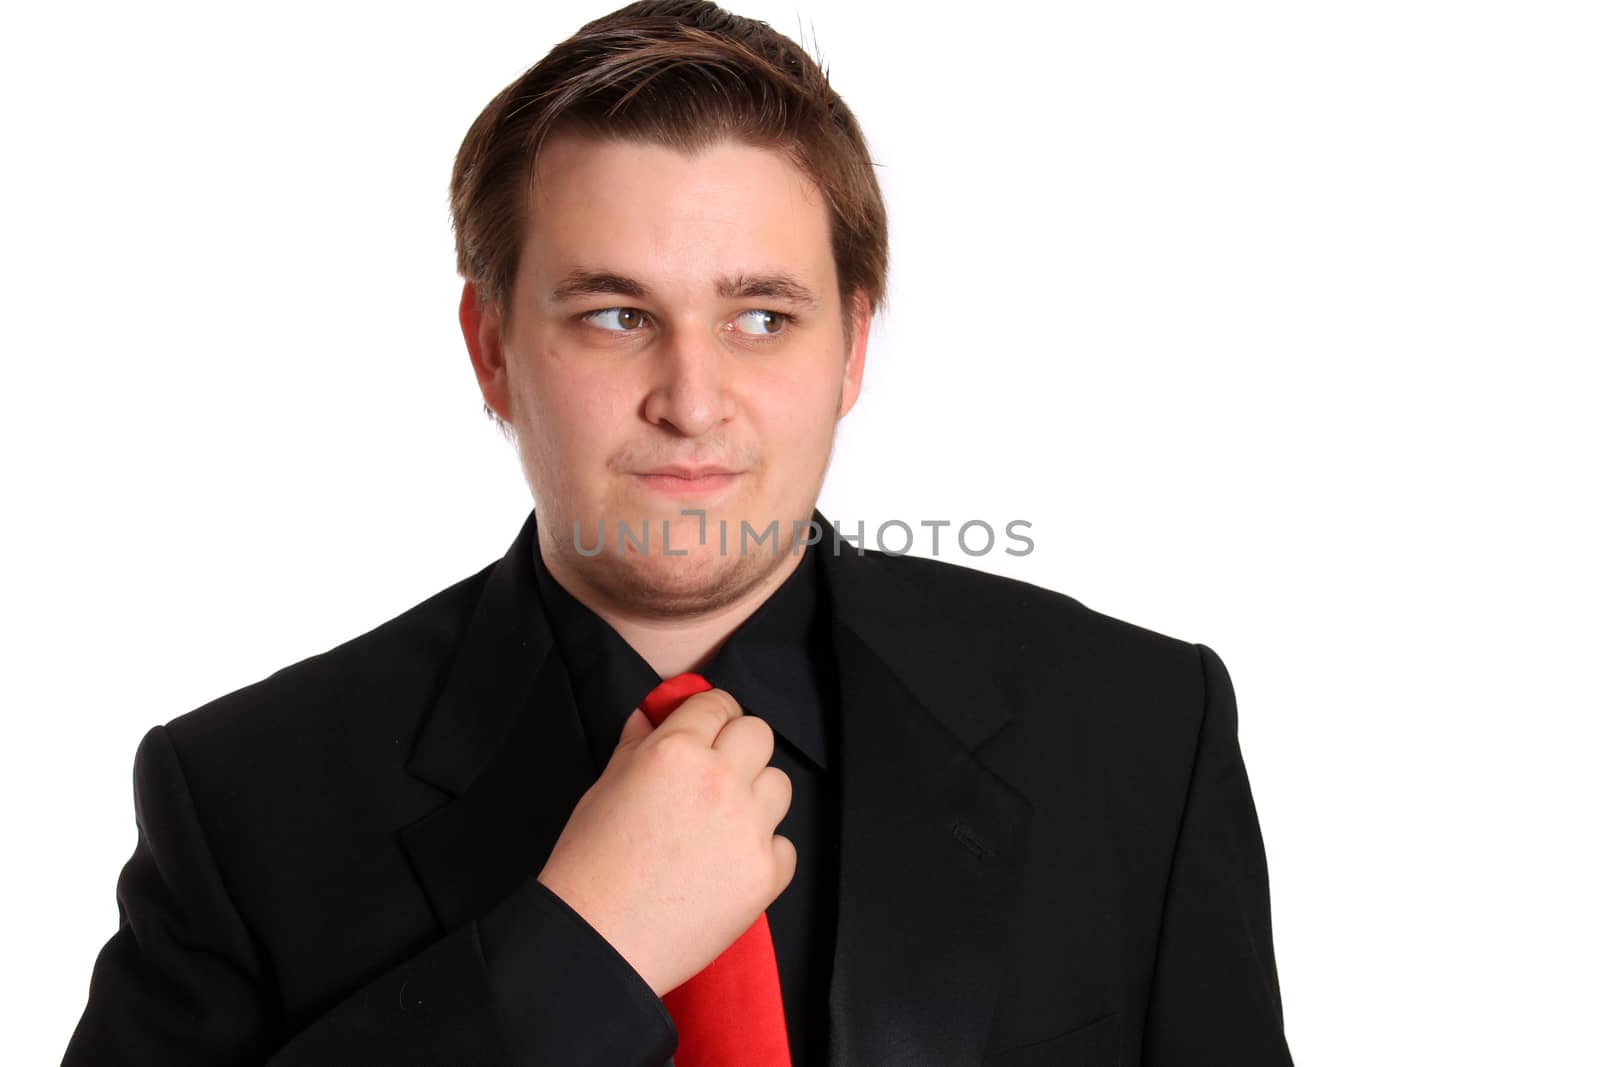 Handsome young businessman loosening or fixing his red tie on a white background